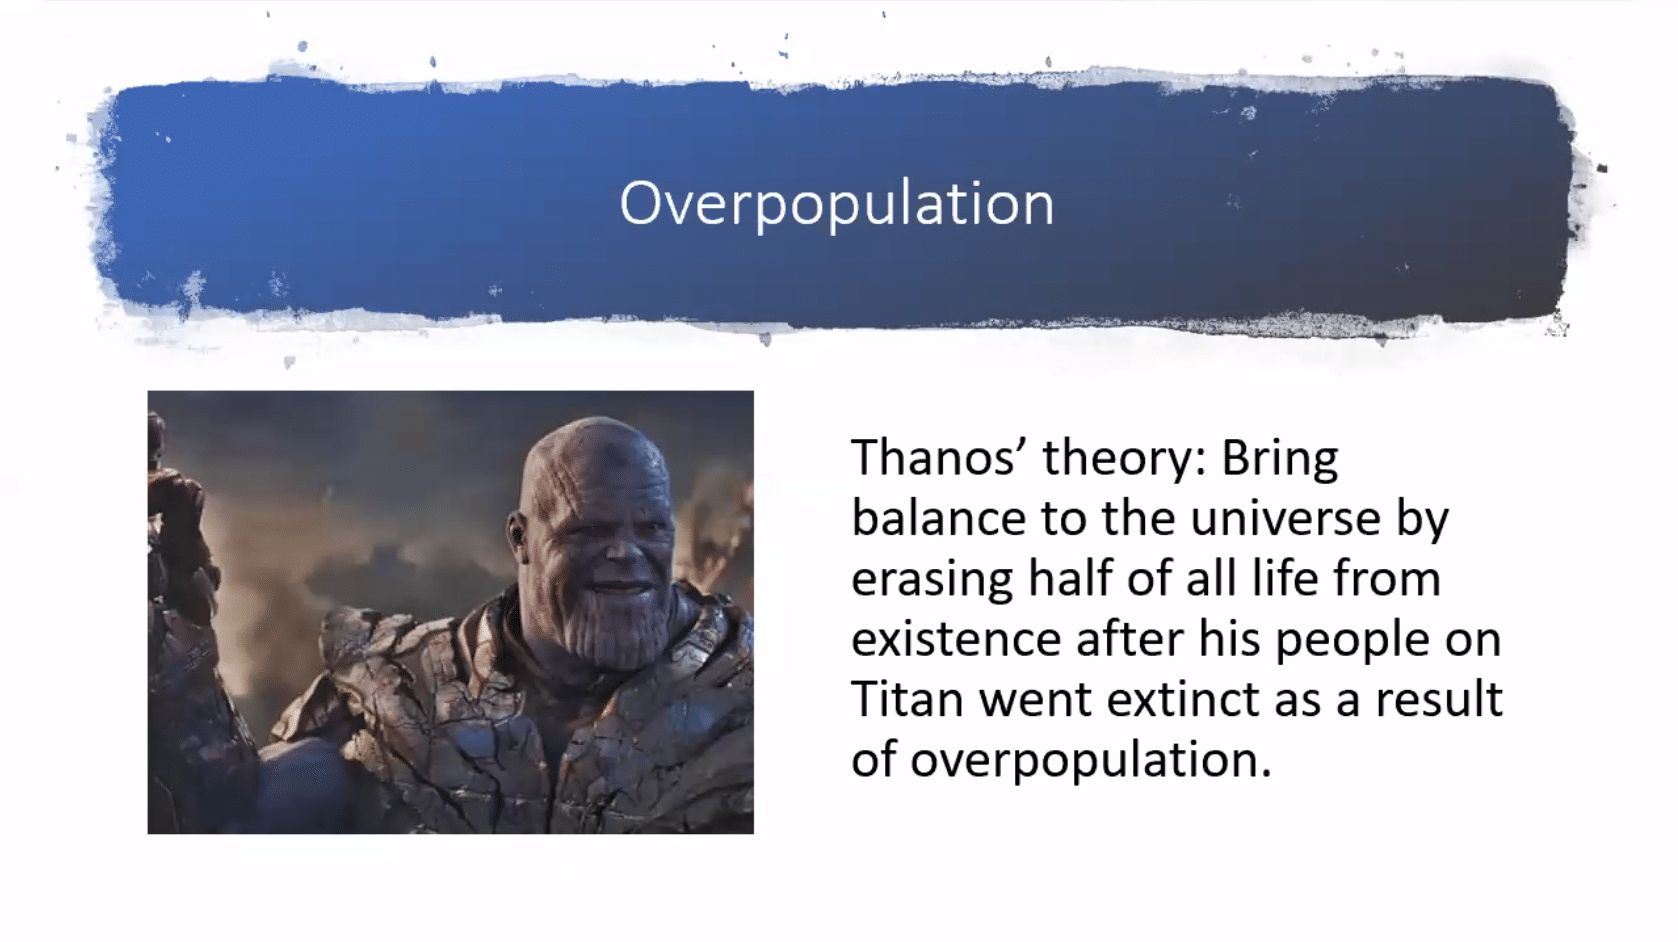 Thanos, My Planet Earth Avengers Memes Thanos, My Planet Earth text: Overpopulation Thanos' theory: Bring balance to the universe by erasing half of all life from existence after his people on Titan went extinct as a result of overpopulation. 